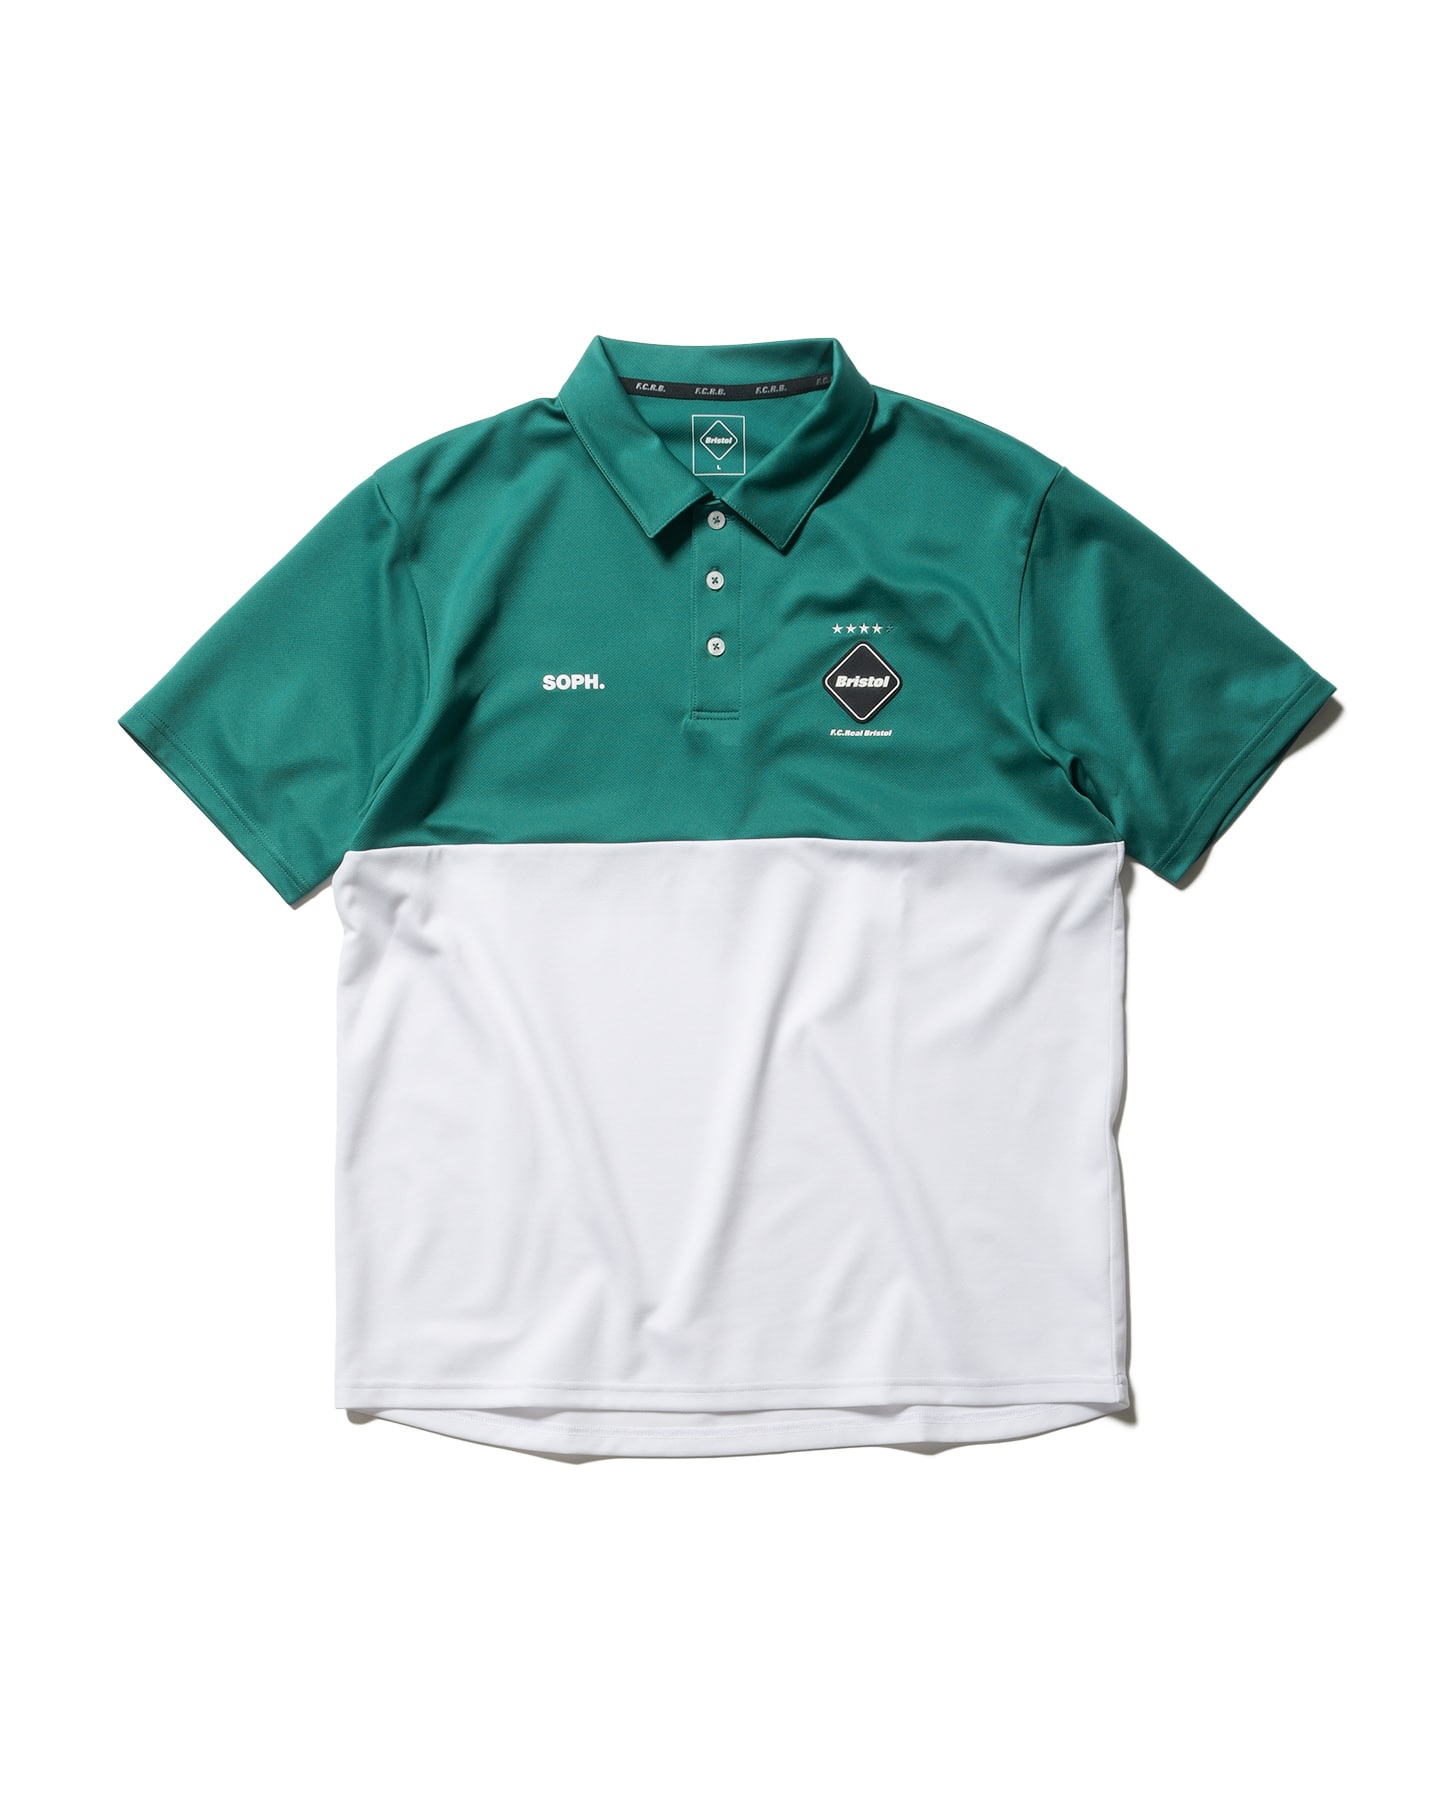 FCRB S/S TEAM POLO  ブリストル  ポロシャツ